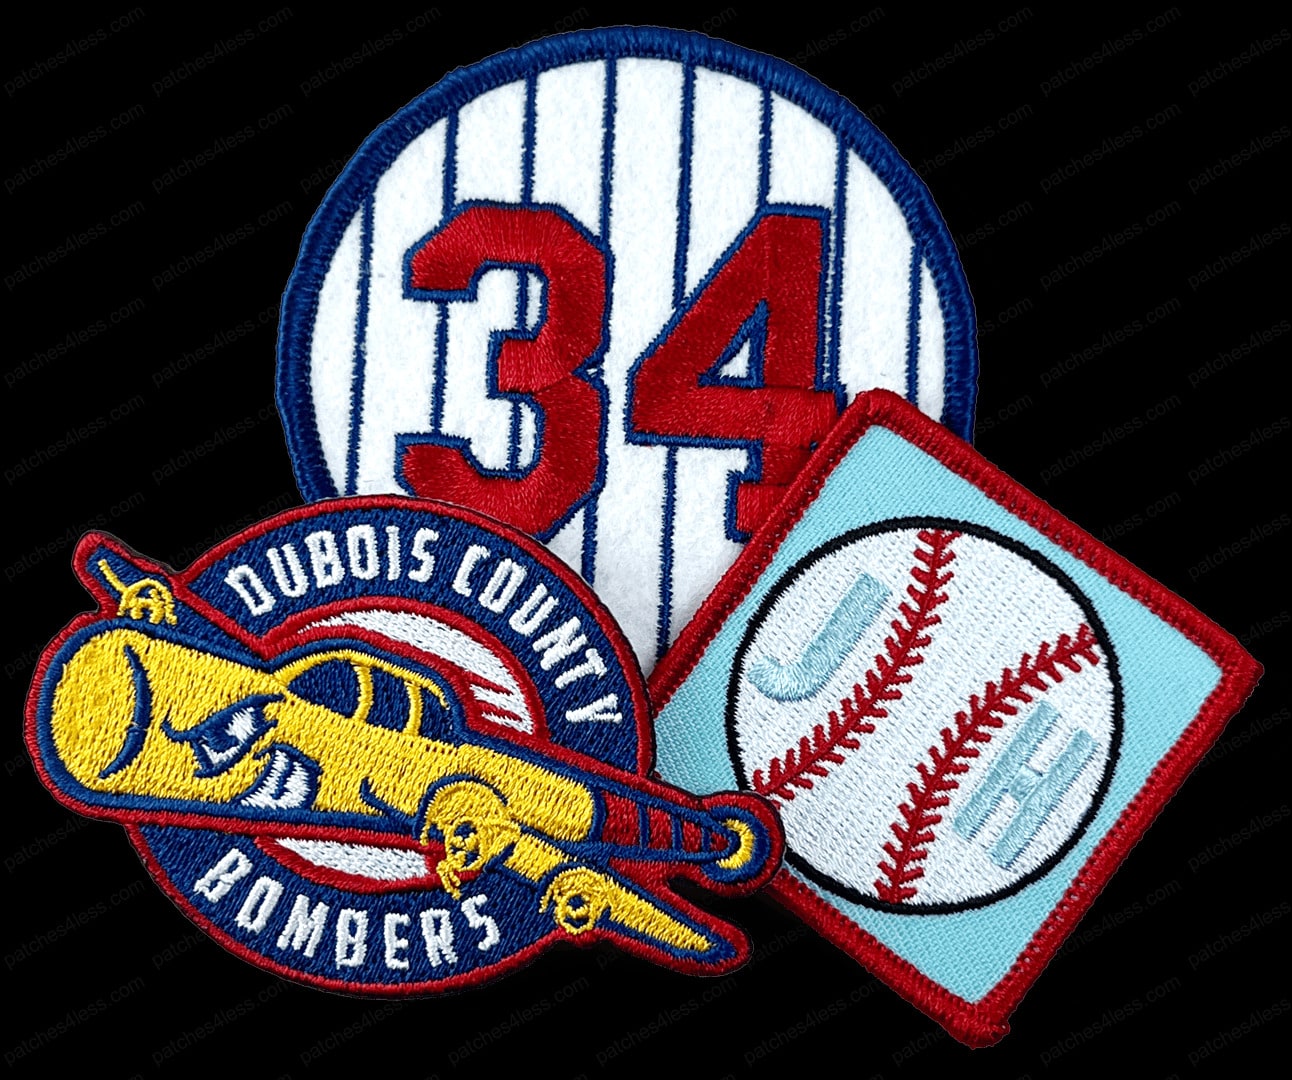 Three baseball patches. One is a circular patch with blue pinstripes and the number '34' in red. Another is a patch with a cartoon yellow airplane and the text 'Dubois County Bombers'. The third is a square patch with a baseball and the letters 'JH'.